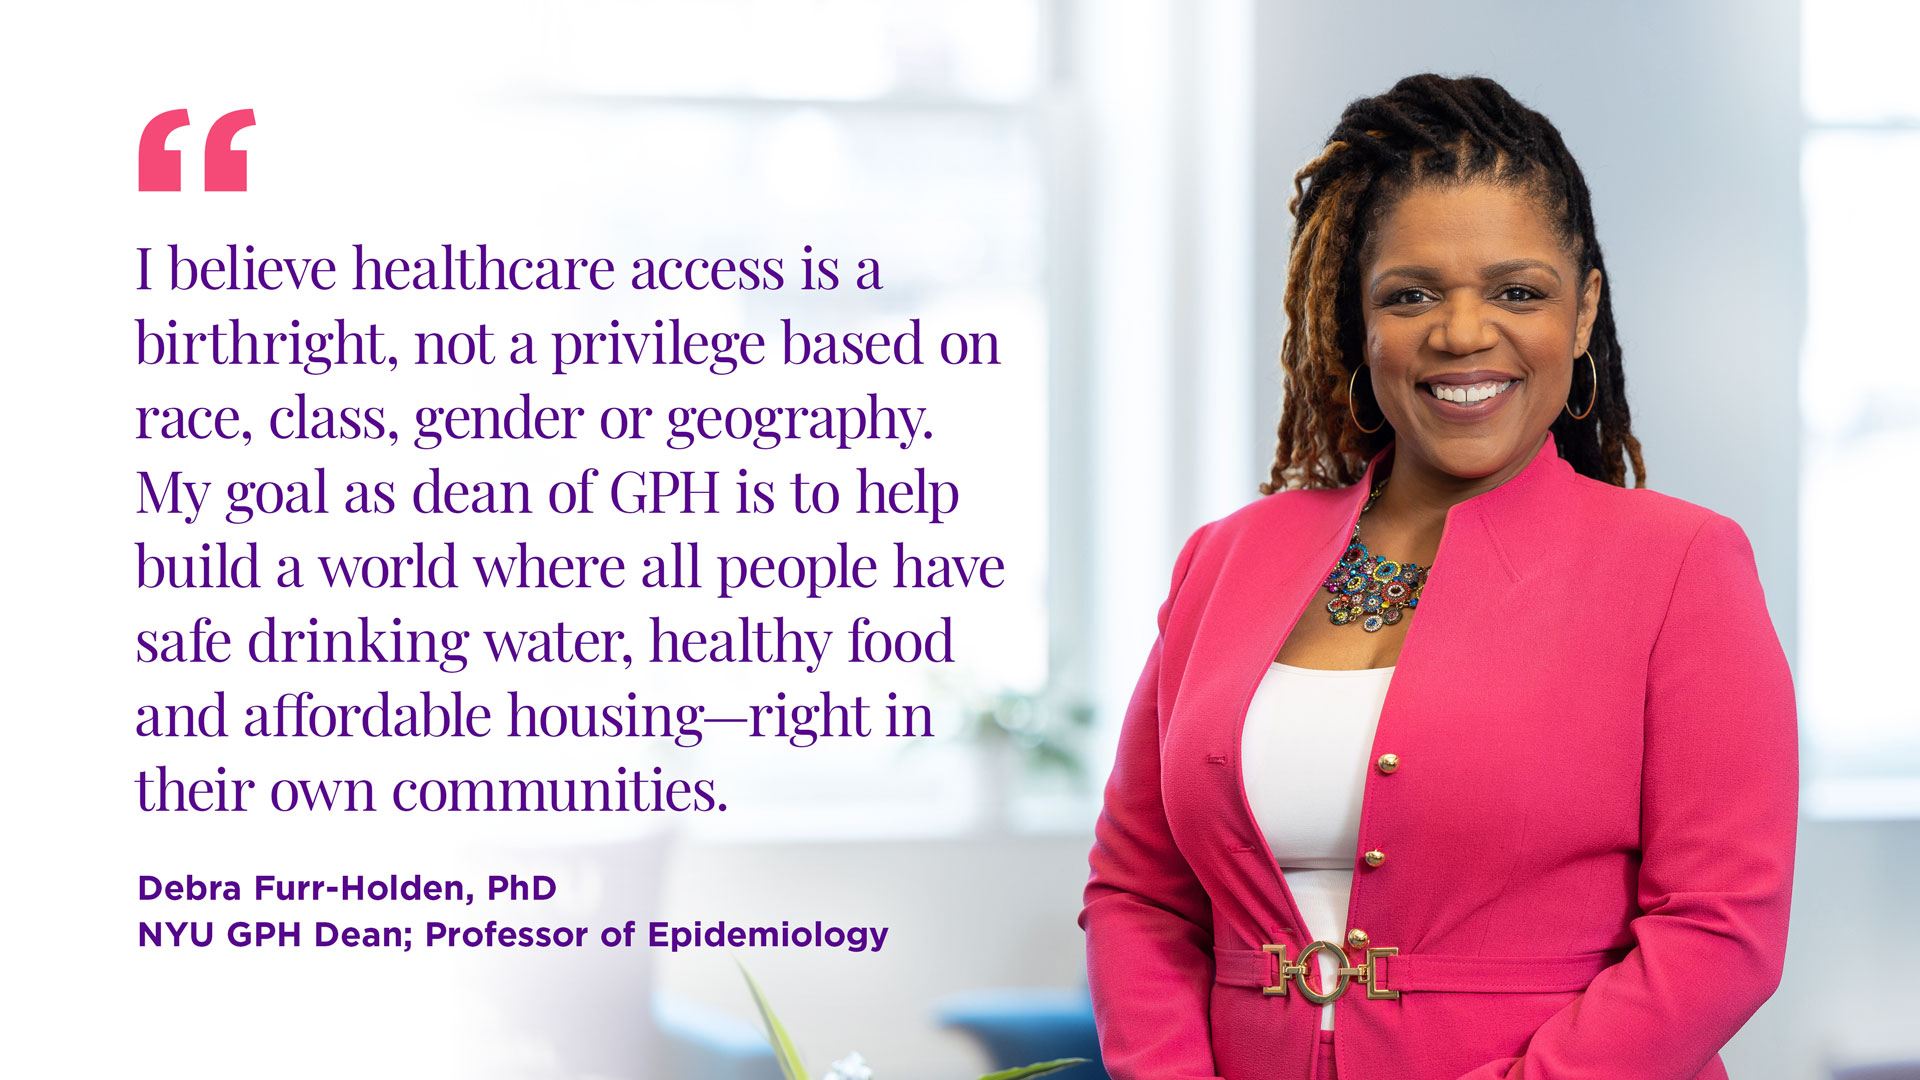 "I believe healthcare access is a birthright, not a privilege based on race, class, gender or geography. My goal as dean of GPH is to help build a world where all people have safe drinking water, healthy food and affordable housing—right in their own communities."  Dr. Debra Furr-Holden NYU GPH Dean